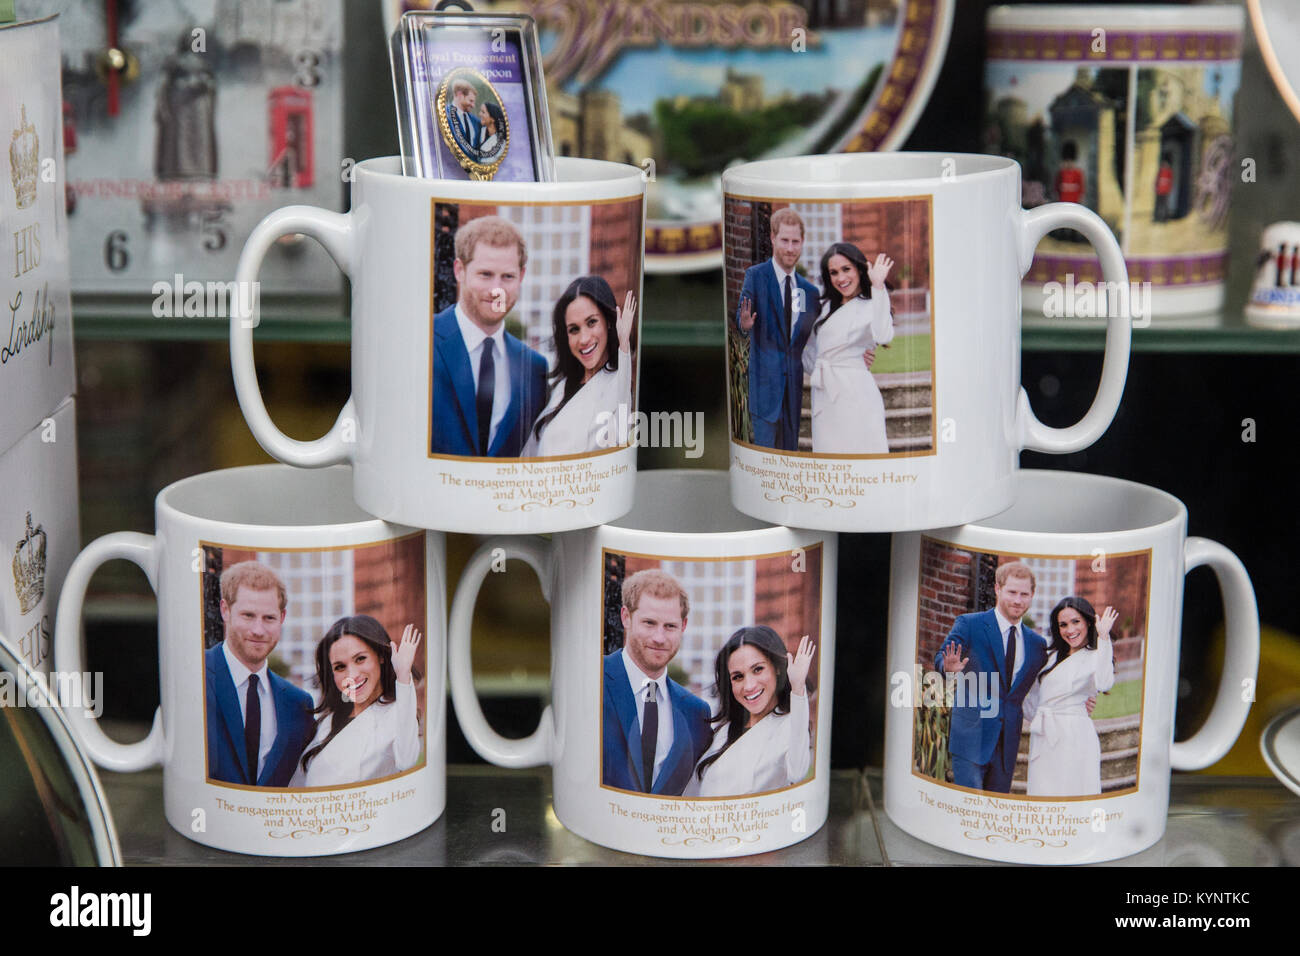 Windsor, UK. 15th Jan, 2018. Mugs and other mementos featuring images of Prince Harry and Meghan Markle have begun to appear in souvenir and gift shops around Windsor ahead of the royal wedding at St George's Chapel, Windsor Castle, in May. Credit: Mark Kerrison/Alamy Live News Stock Photo